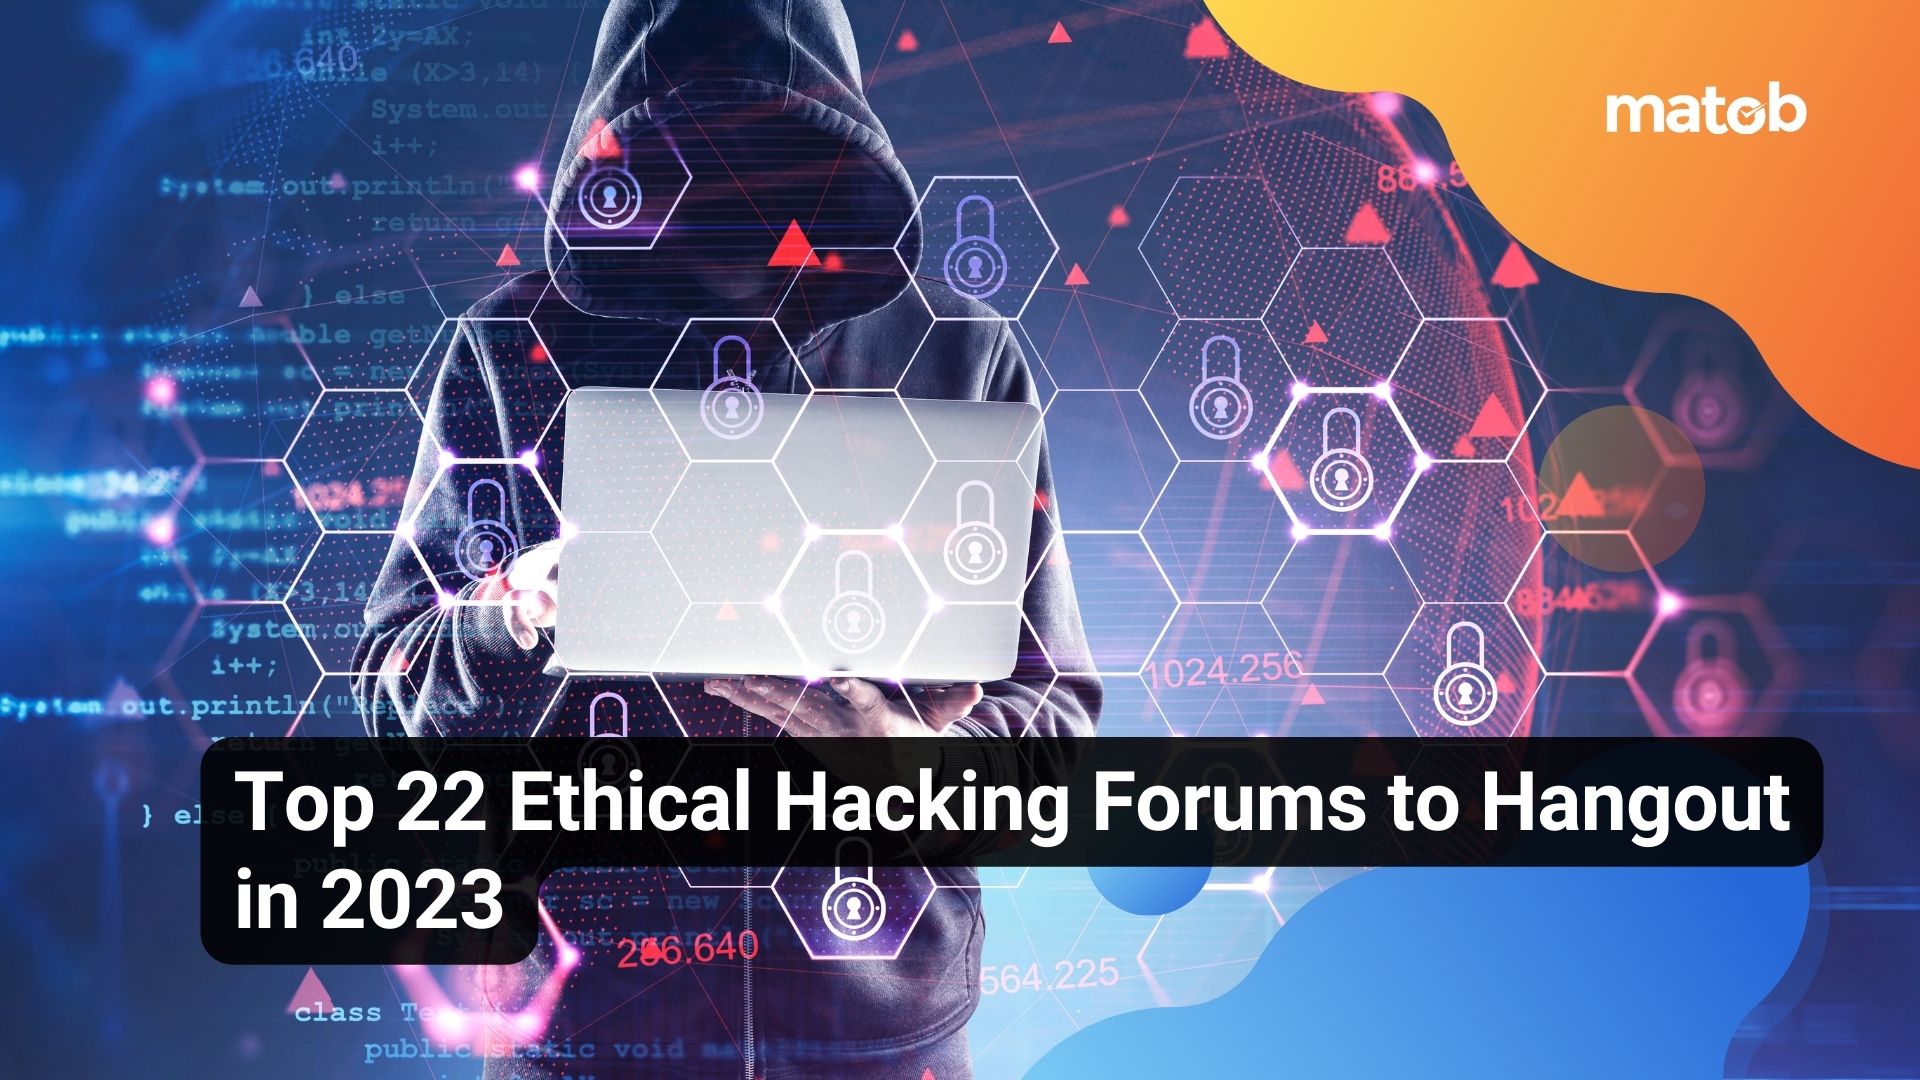 Top 22 Ethical Hacking Forums to Hangout in 2023